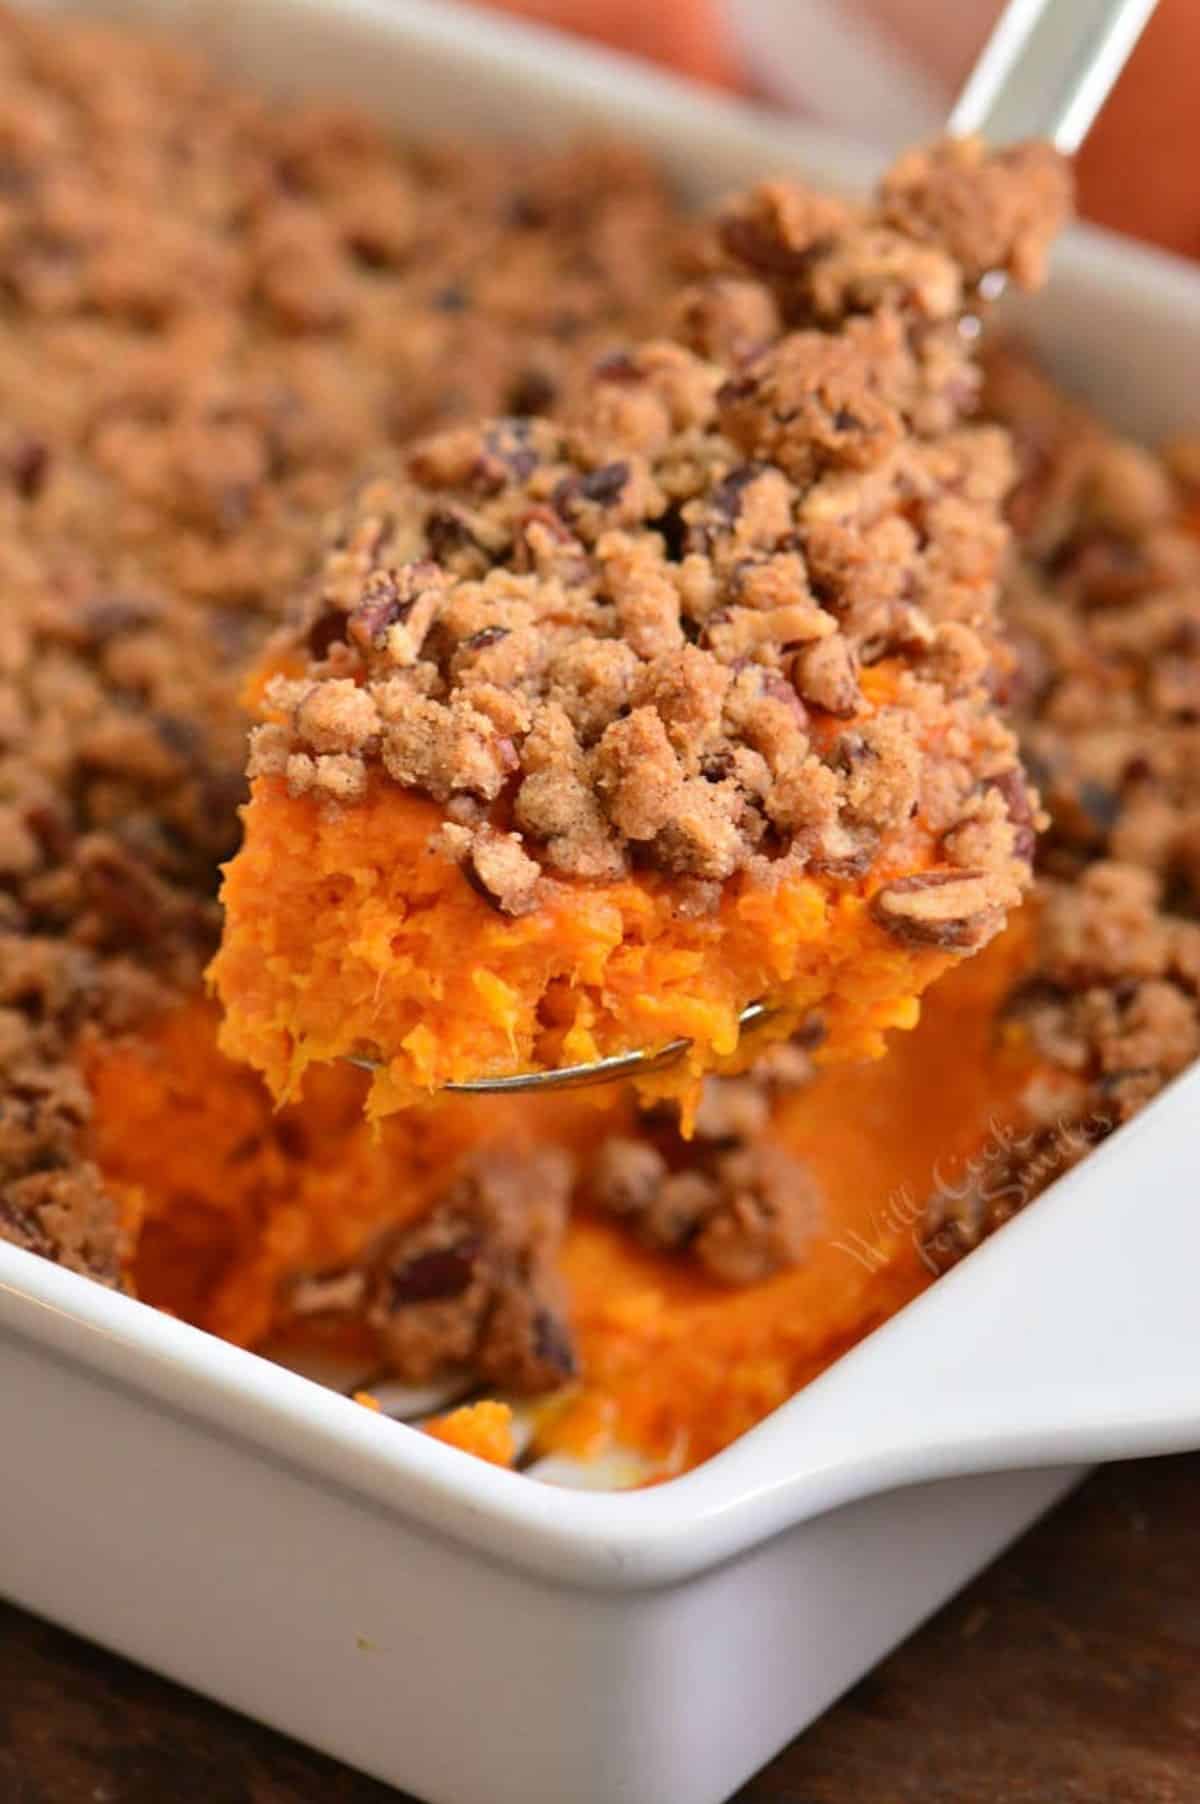 holding scooped sweet potato casserole on a silver spoon over the baking dish.